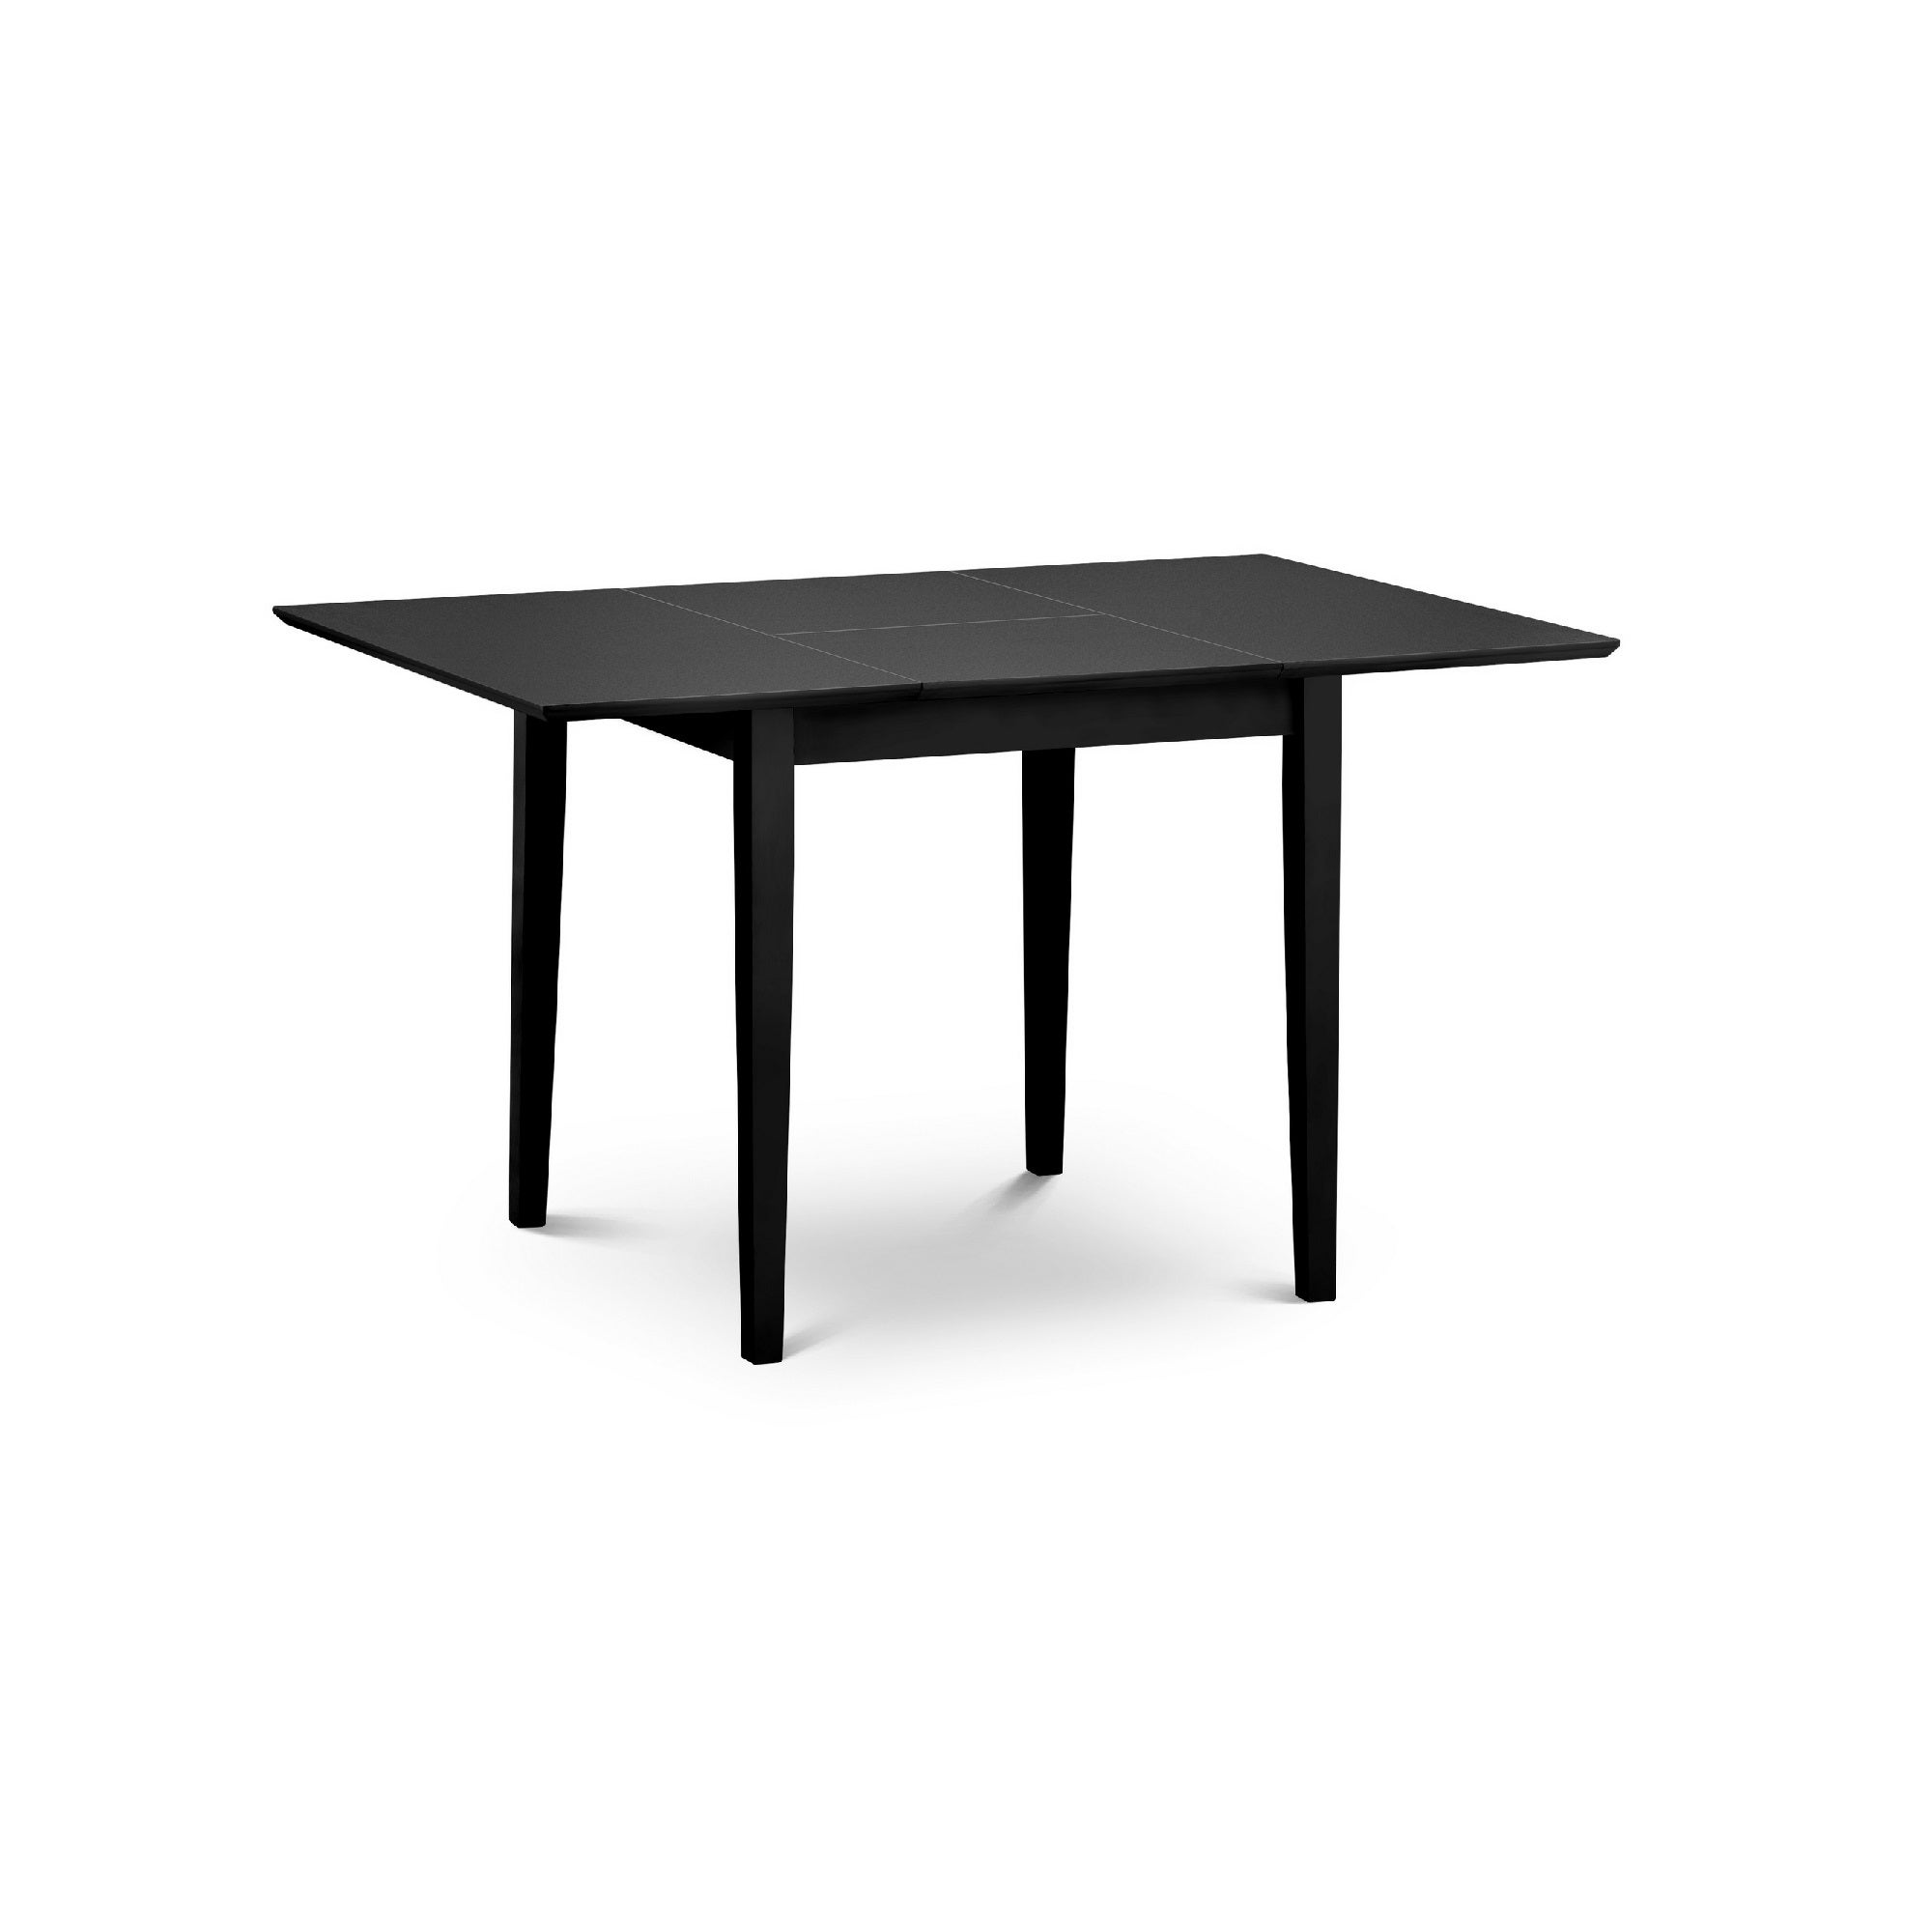 Rufford 4 6 Seater Square Extendable Dining Table Black